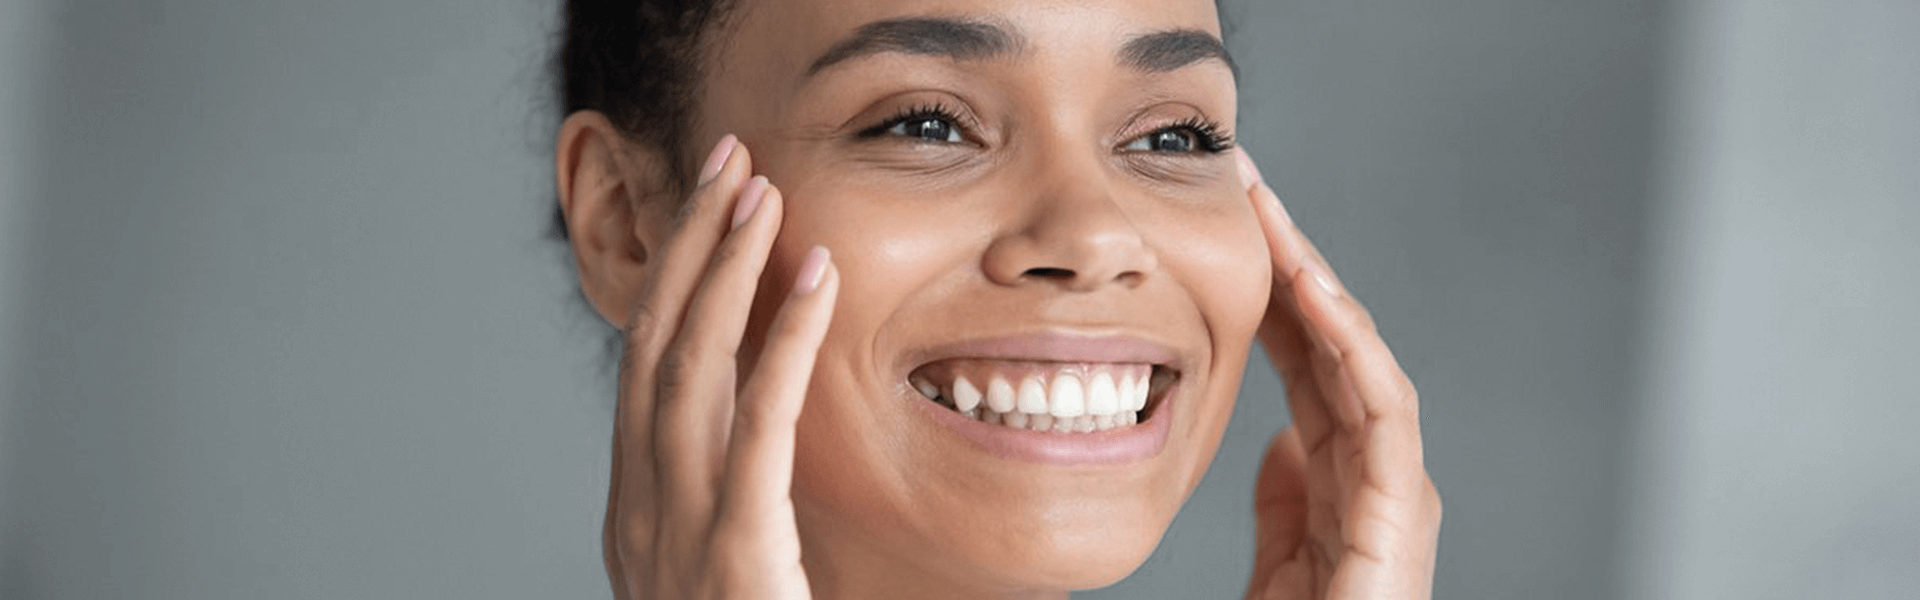 5 Signs You Have Sensitive Skin & How To Treat Them